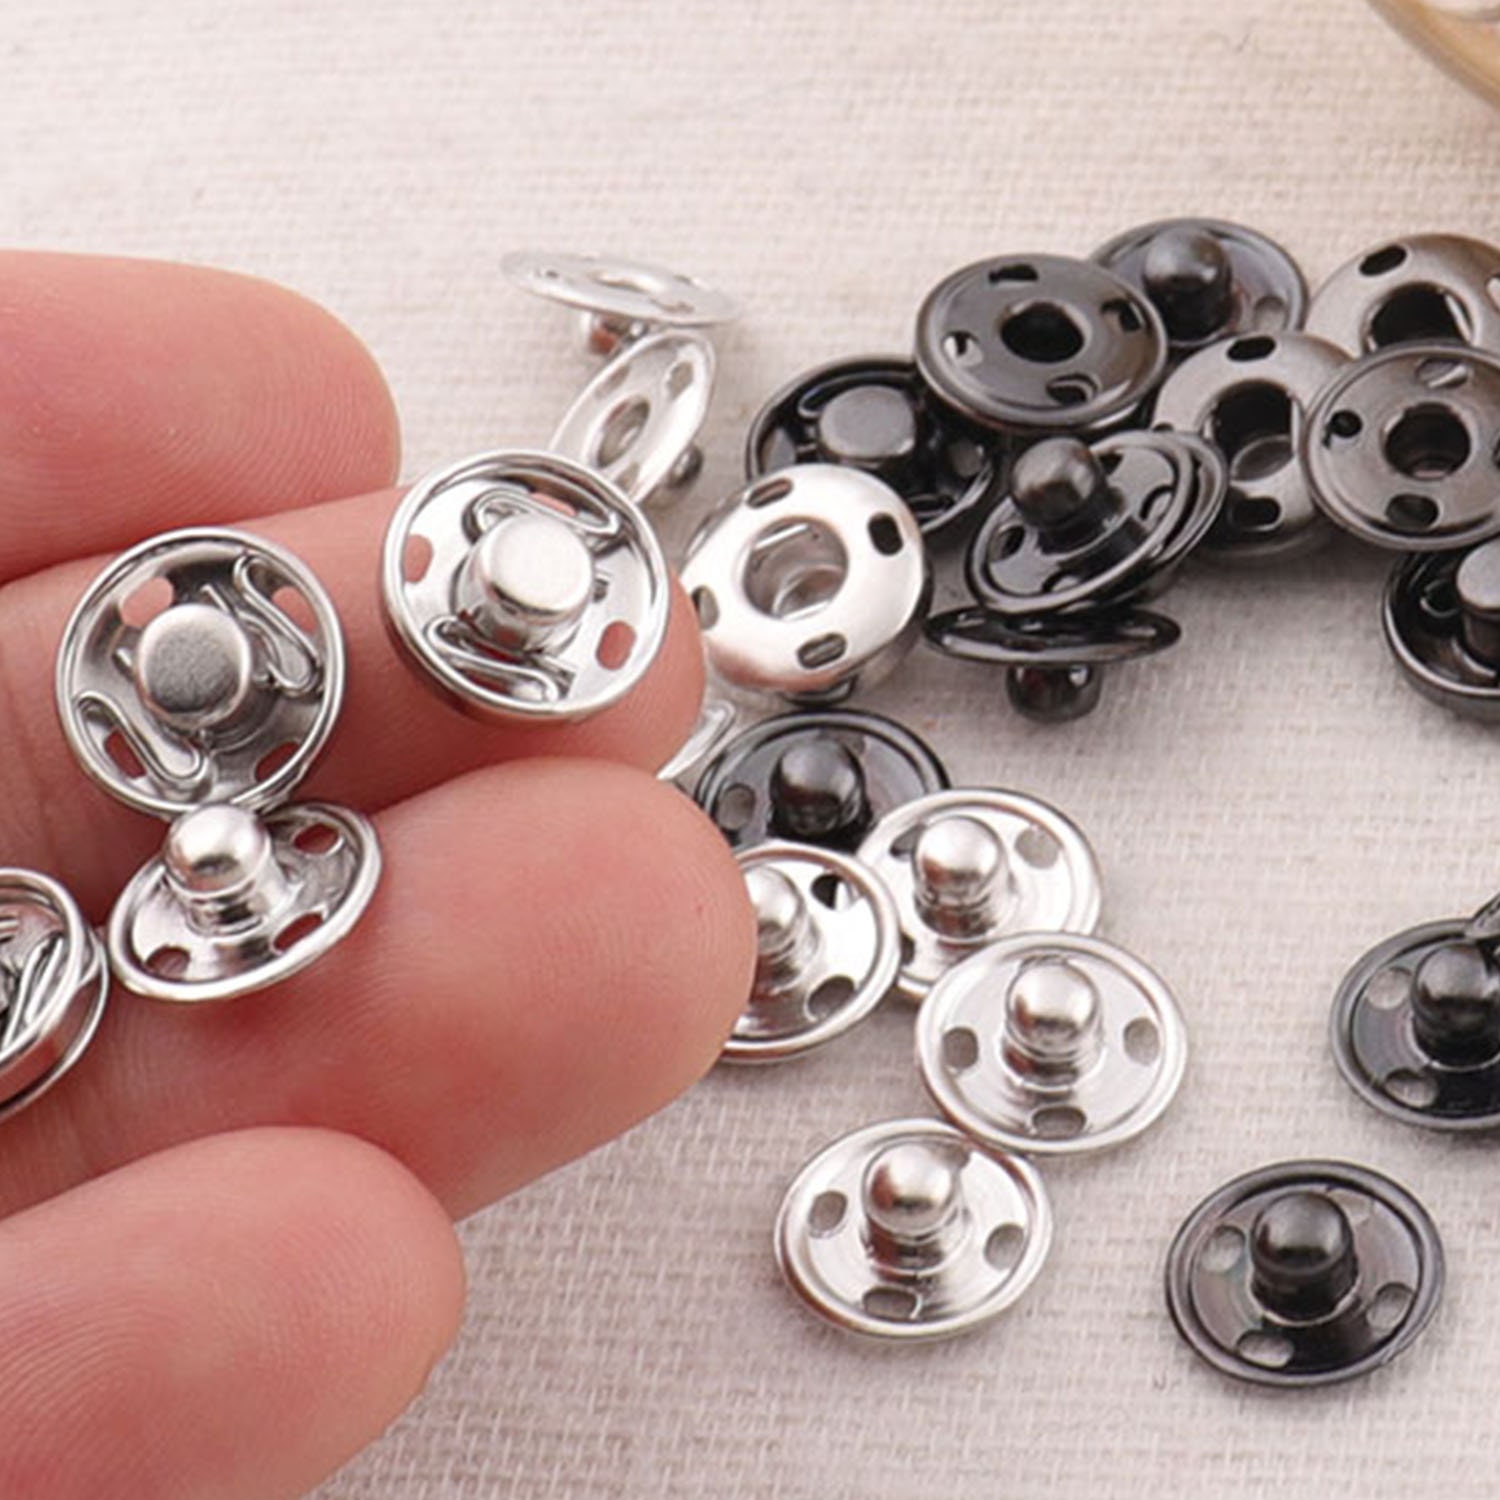 100sets-snap Jewelry-3/810mmsilver/black Snap Buttons-rapid Button-snap  Fasteners Round Buttons-clothes Buttons-hidden Buttons1008 